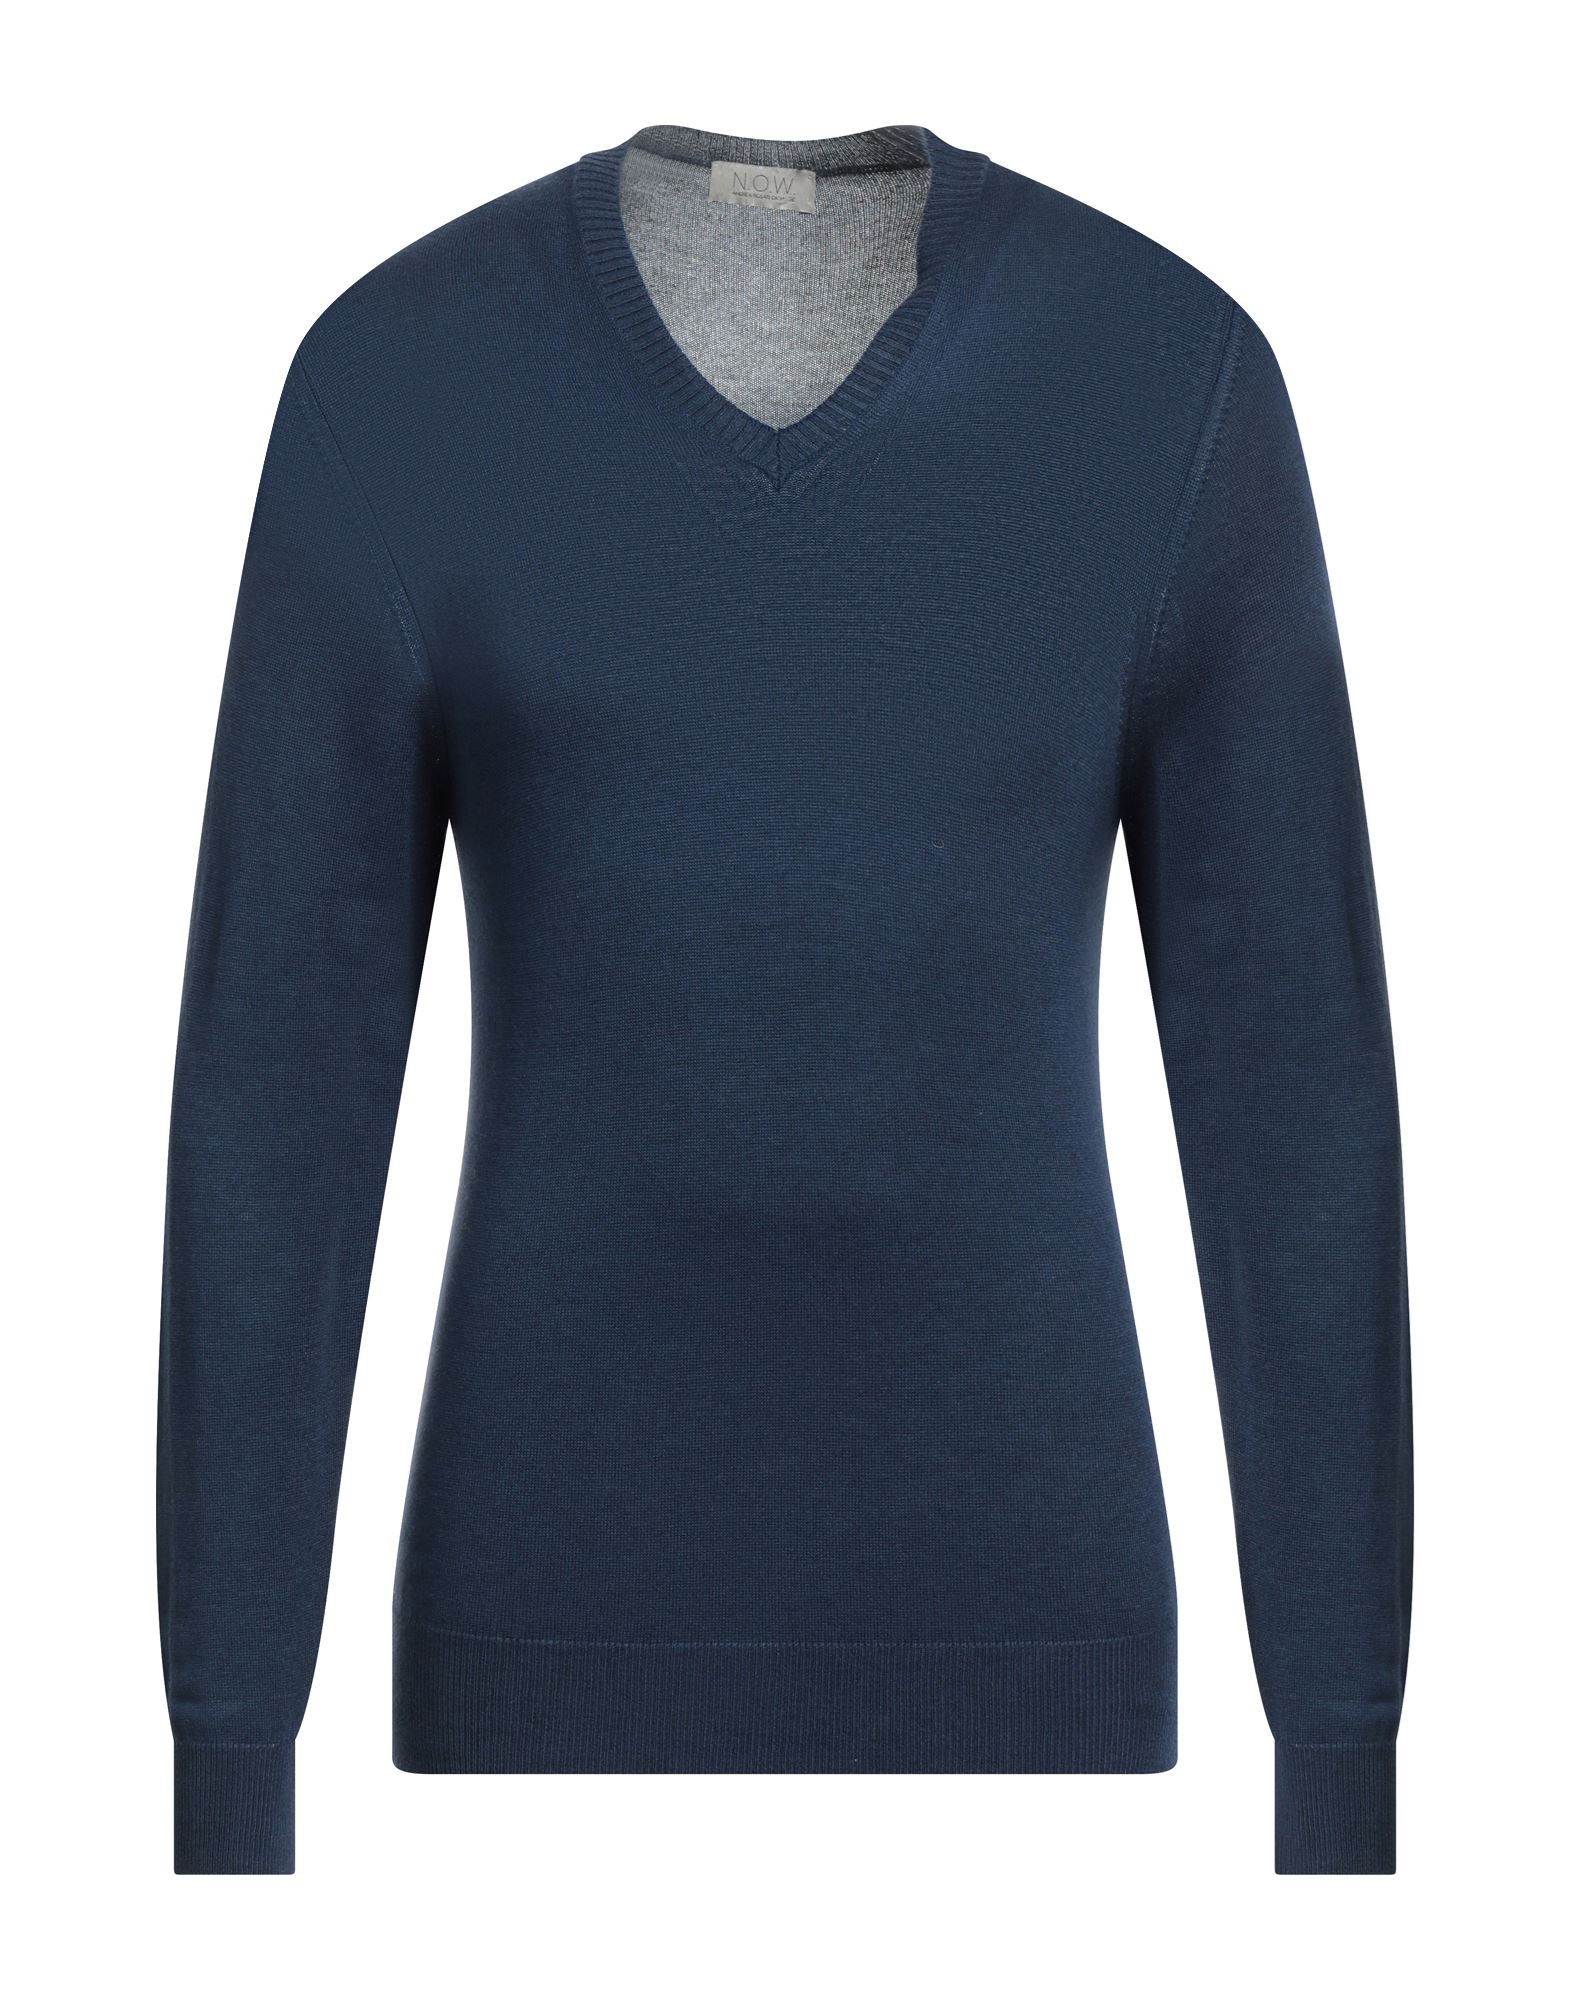 N.o.w. Andrea Rosati Cashmere Sweaters In Navy Blue